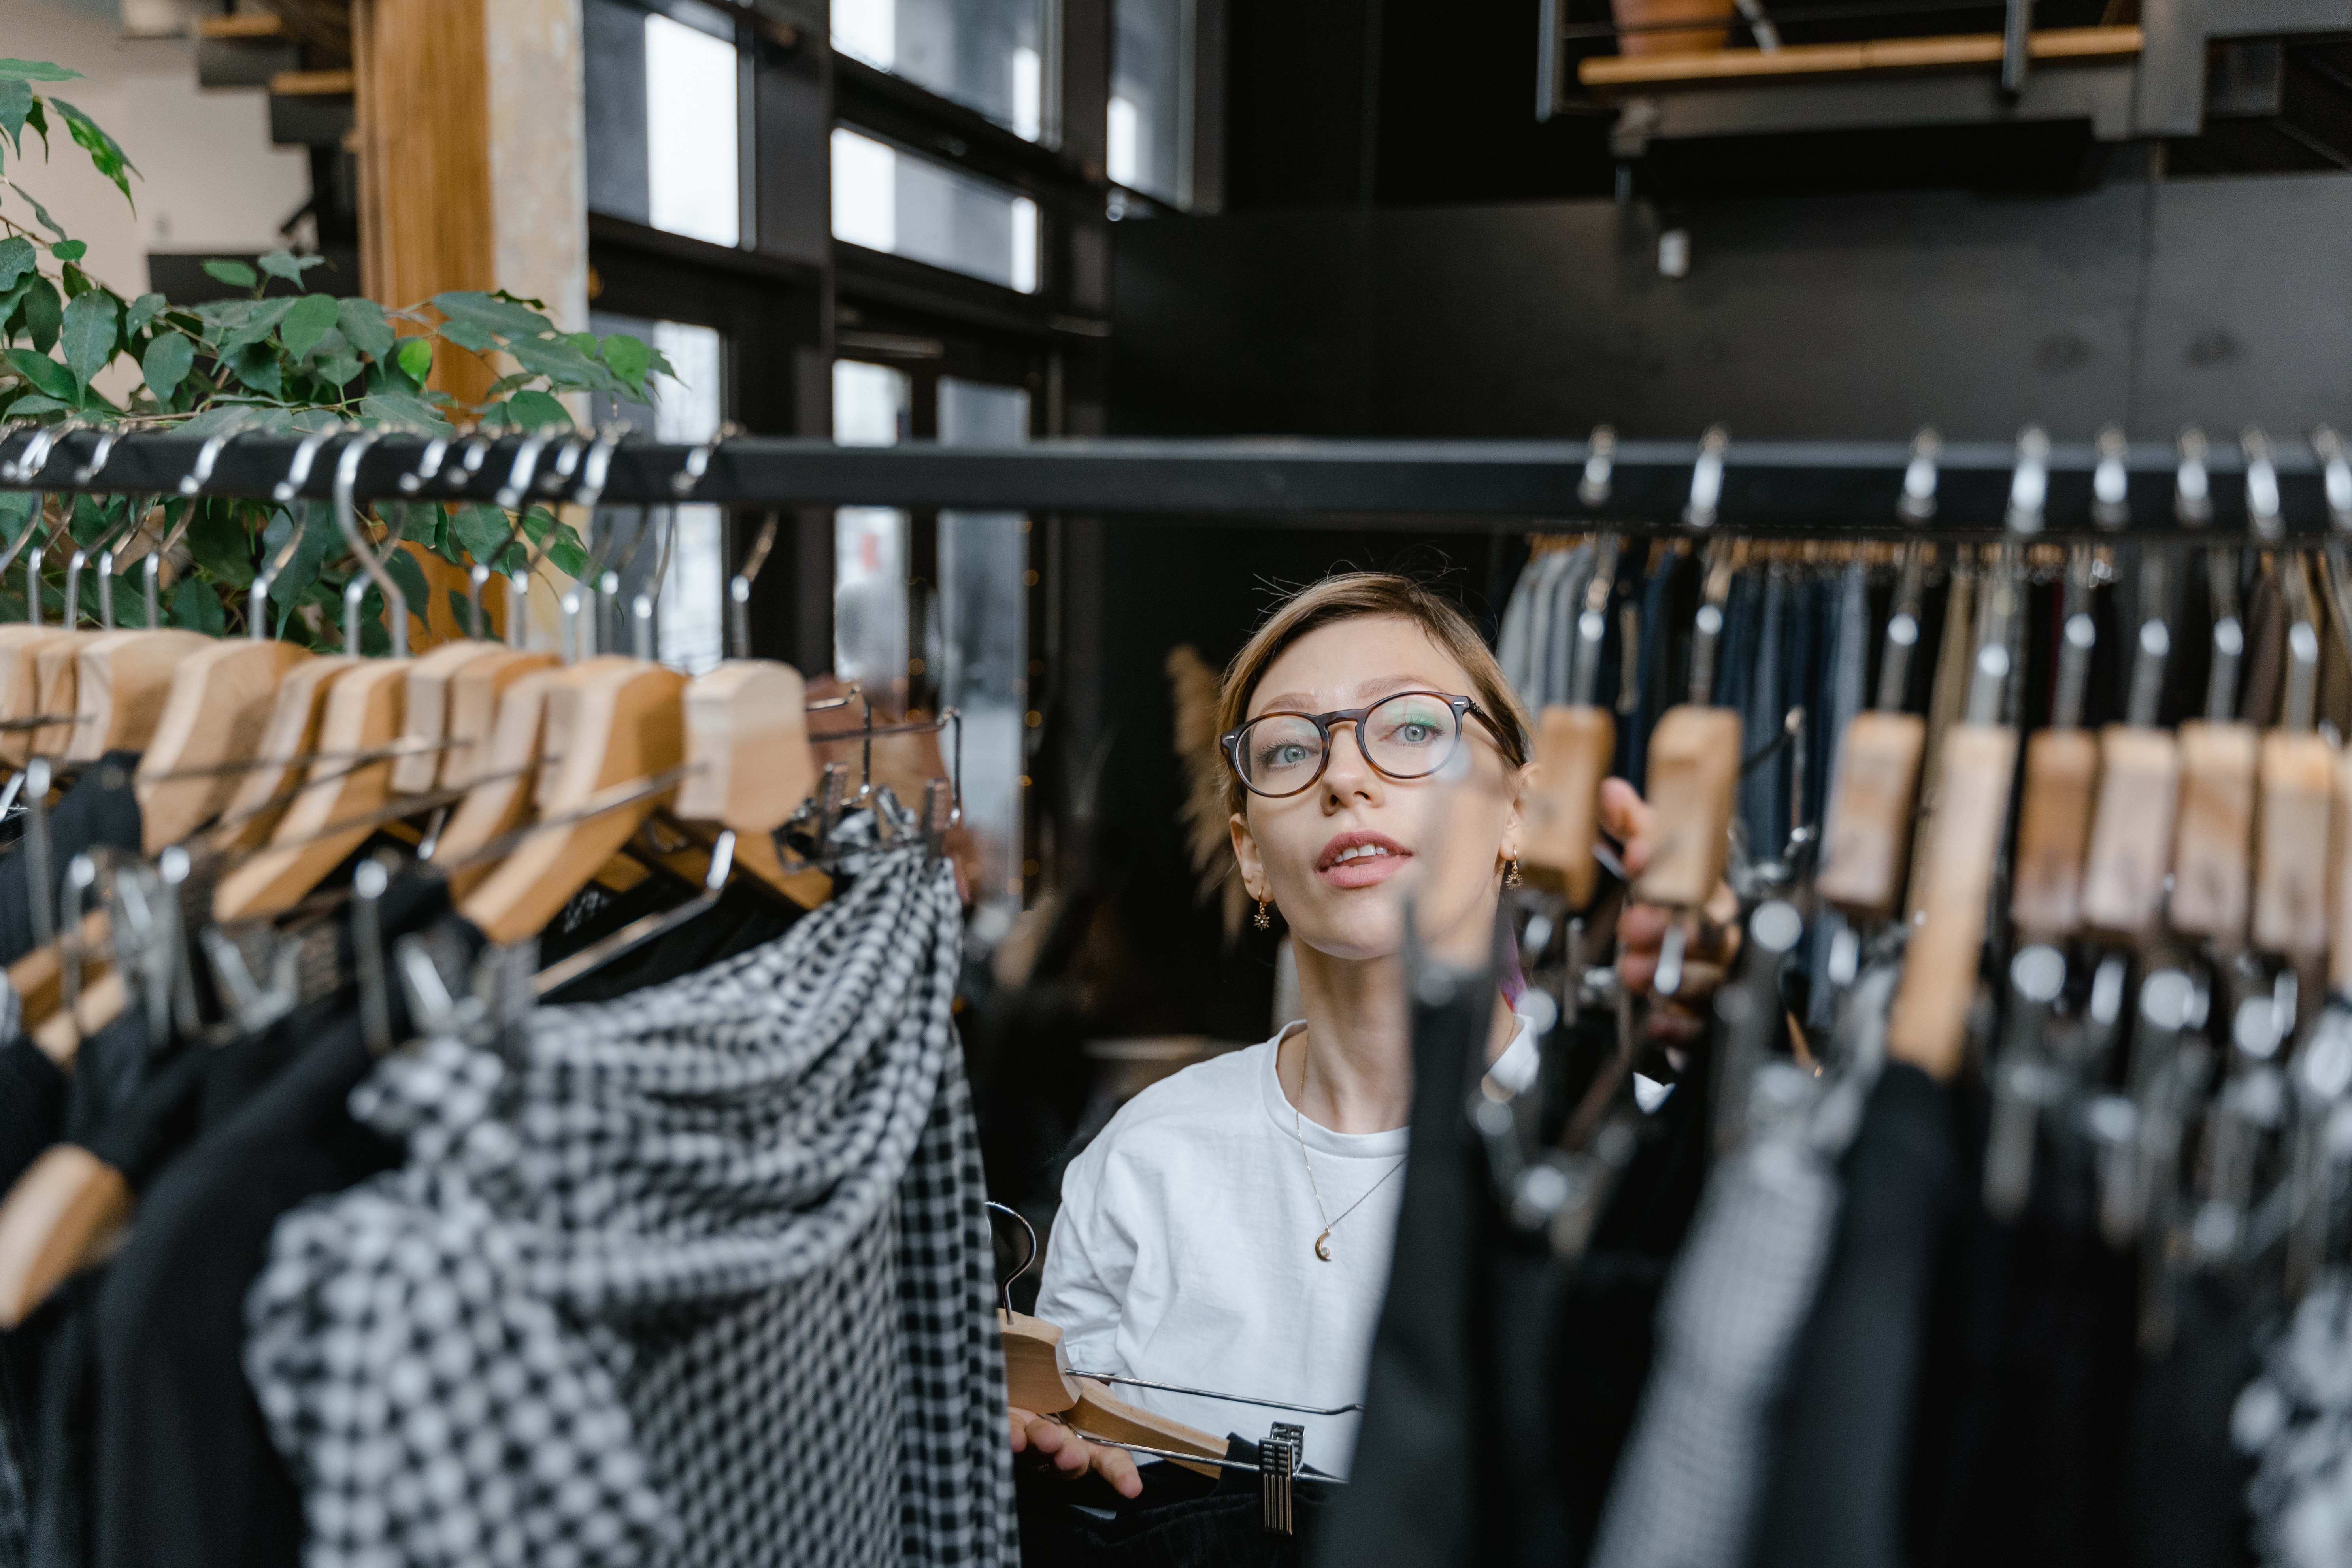 Woman at a clothing store | Source: Pexels